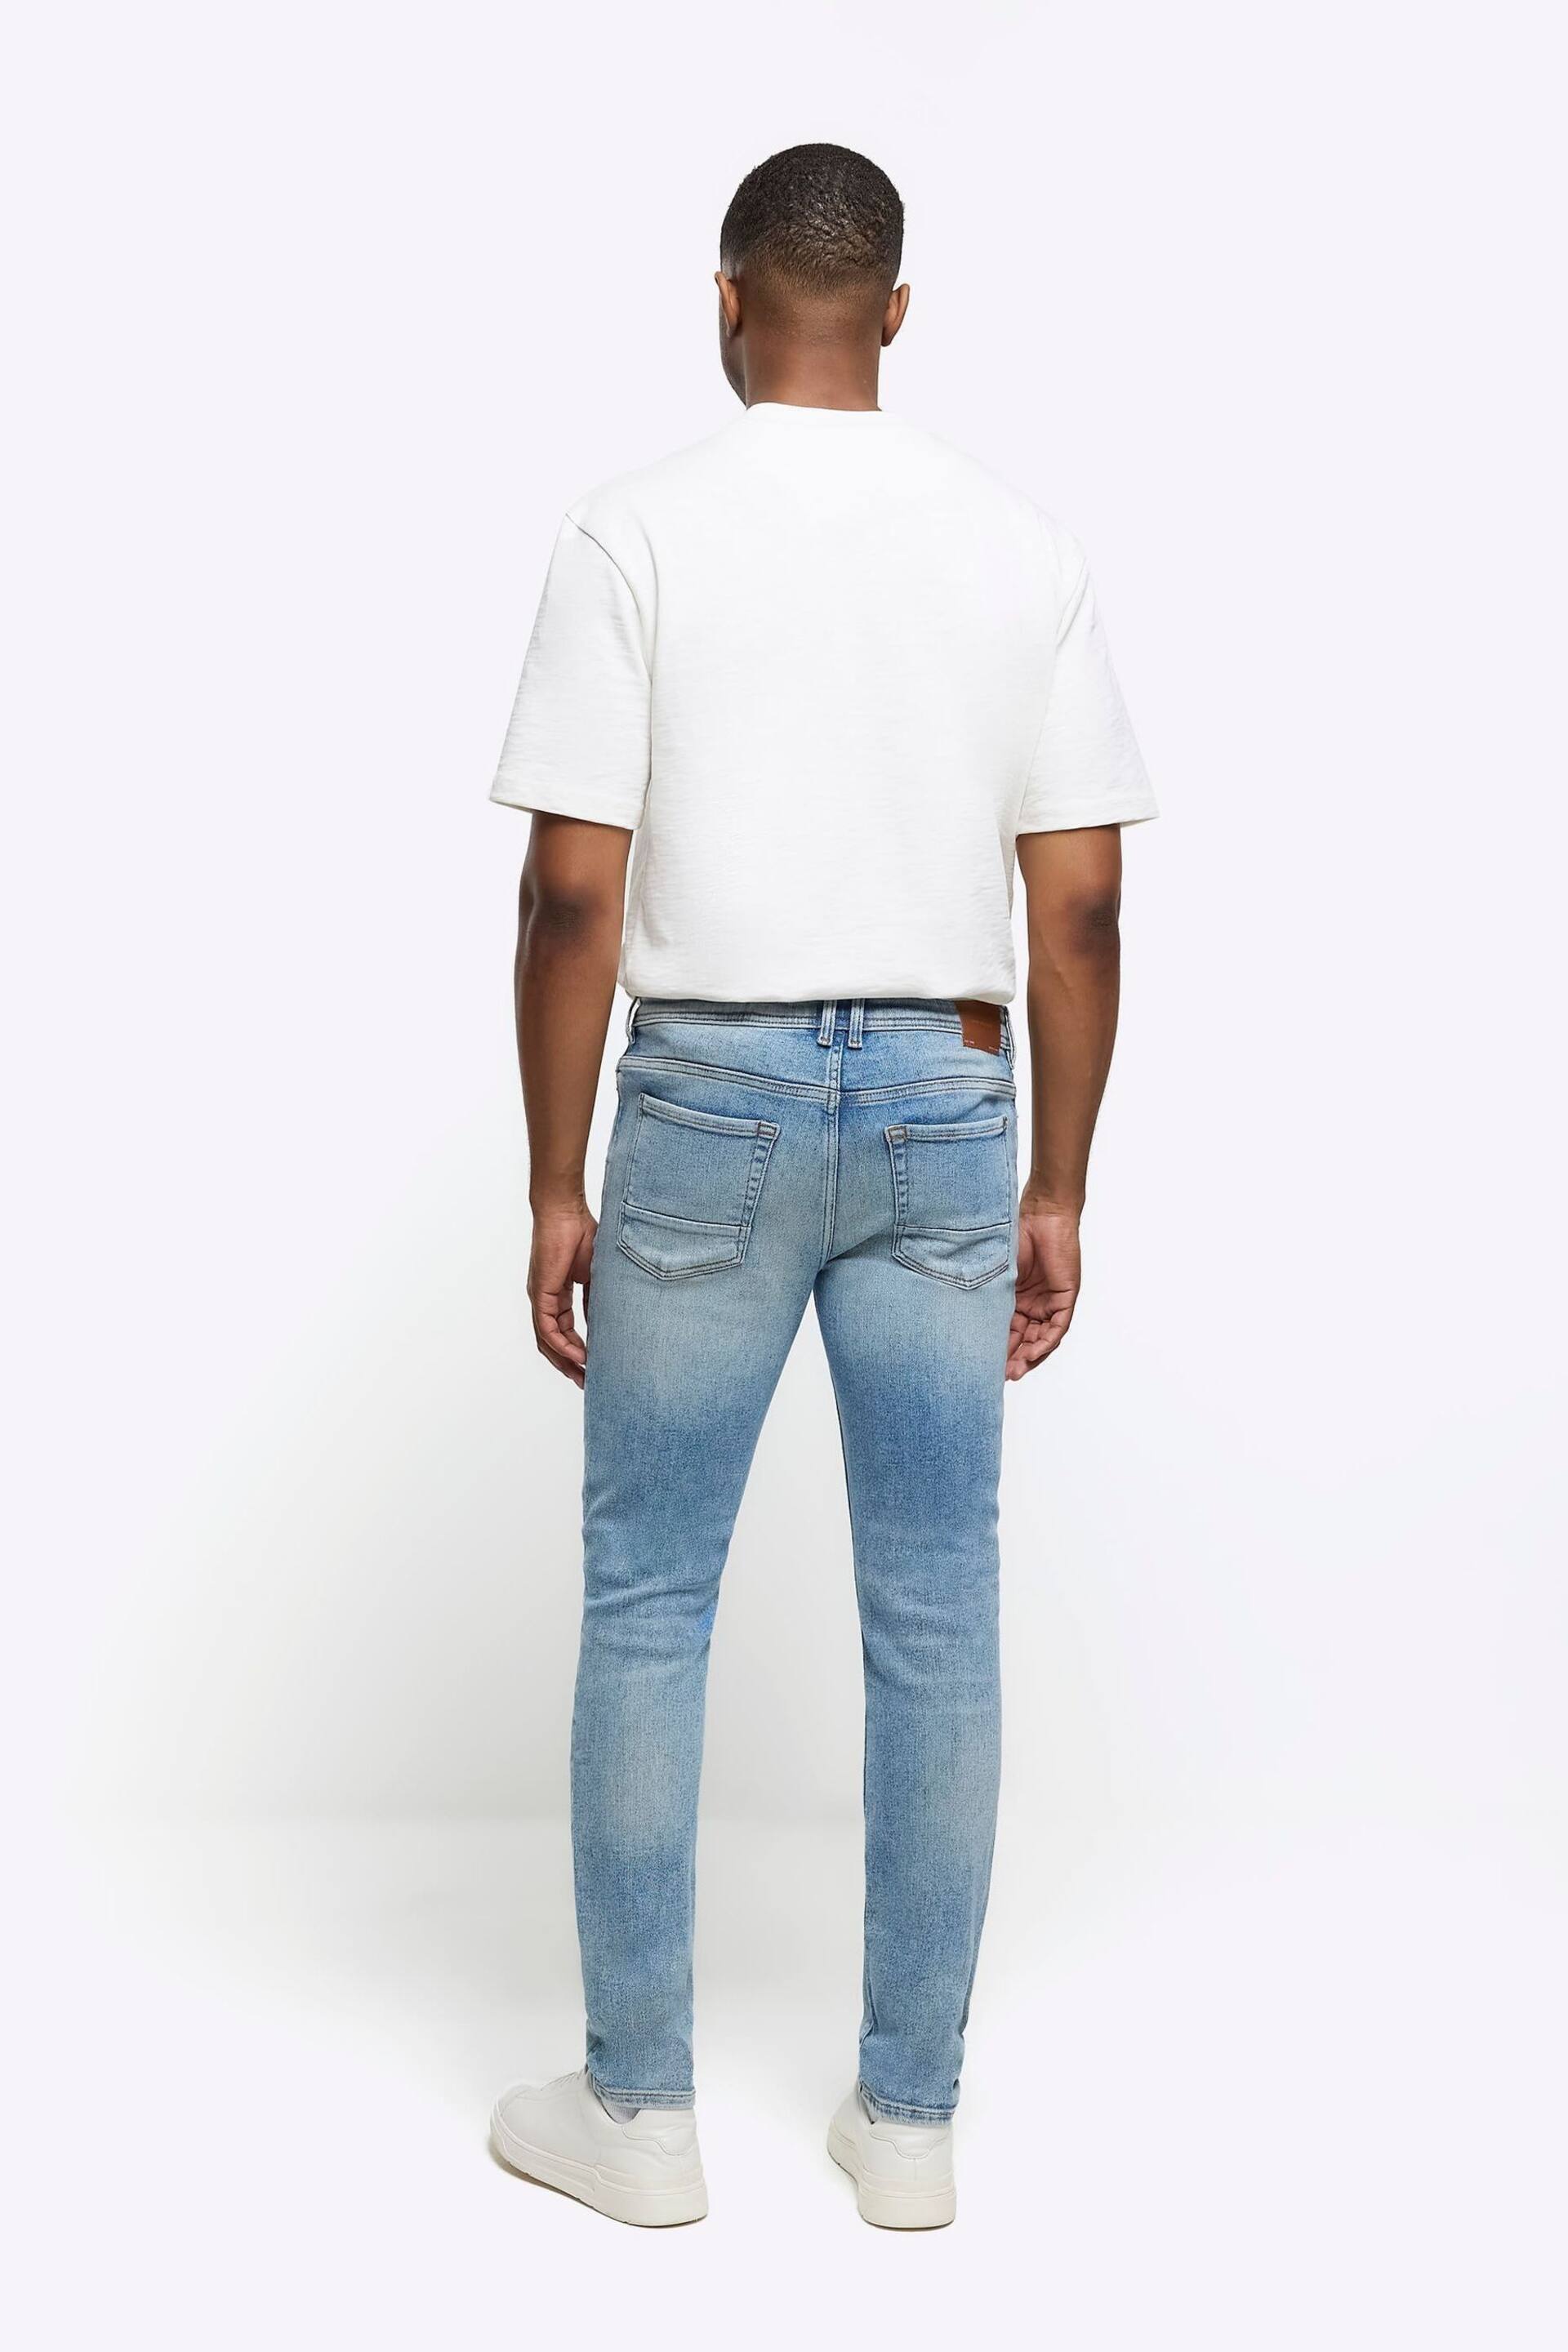 River Island Blue Skinny Fit Jeans - Image 2 of 4